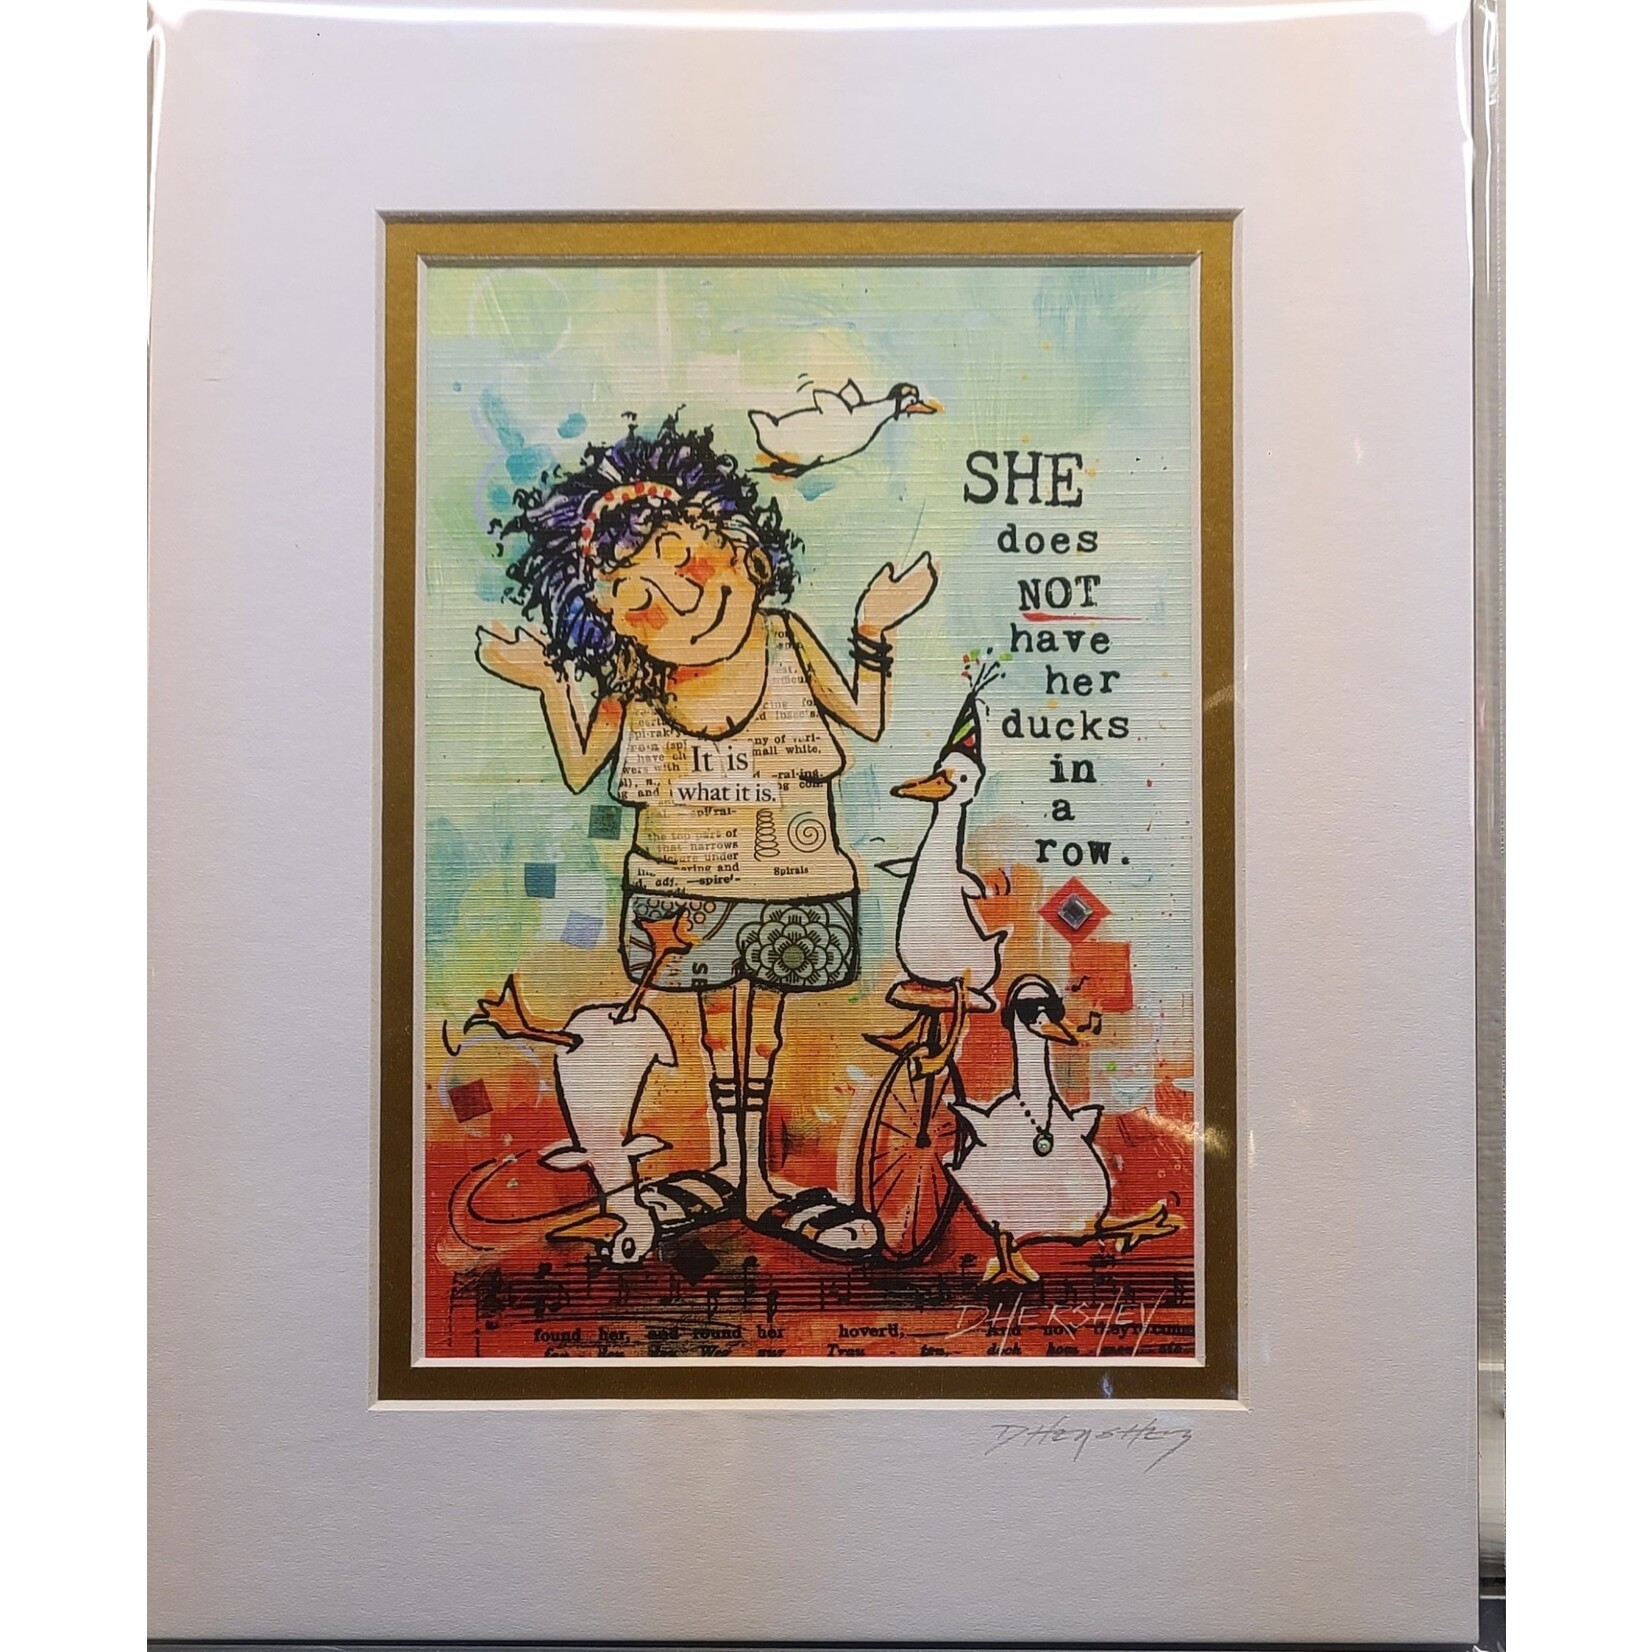 Deborah Hershey Designs "SHE does NOT have her ducks in a row." - Matted Print